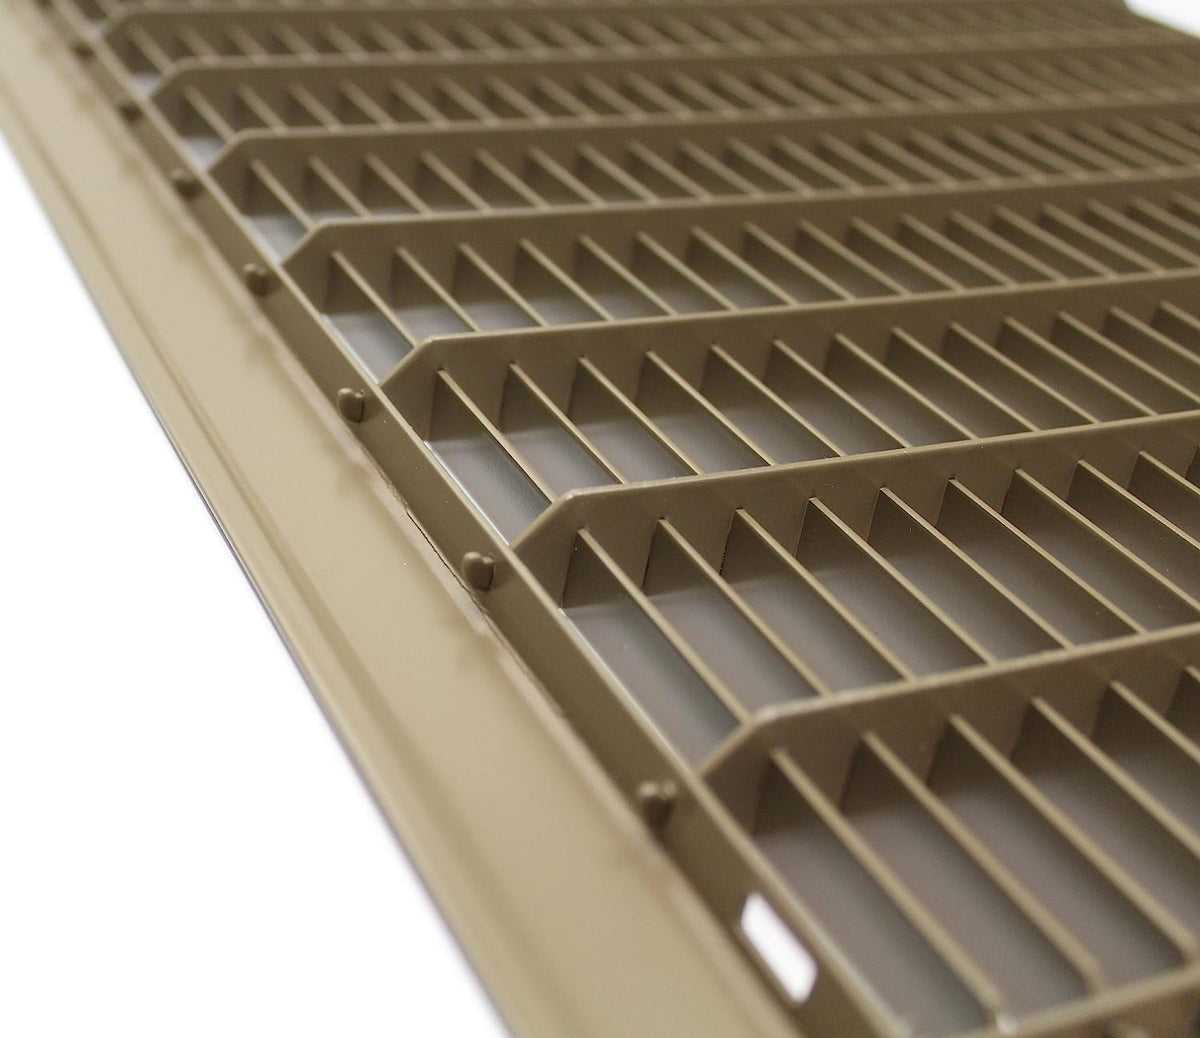 4&quot; X 24&quot; or 24&quot; x 4&quot; Heavy Duty Floor Grille - Fixed Blades Air Grille - Brown [Outer Dimensions: 5.75 X 25.75]